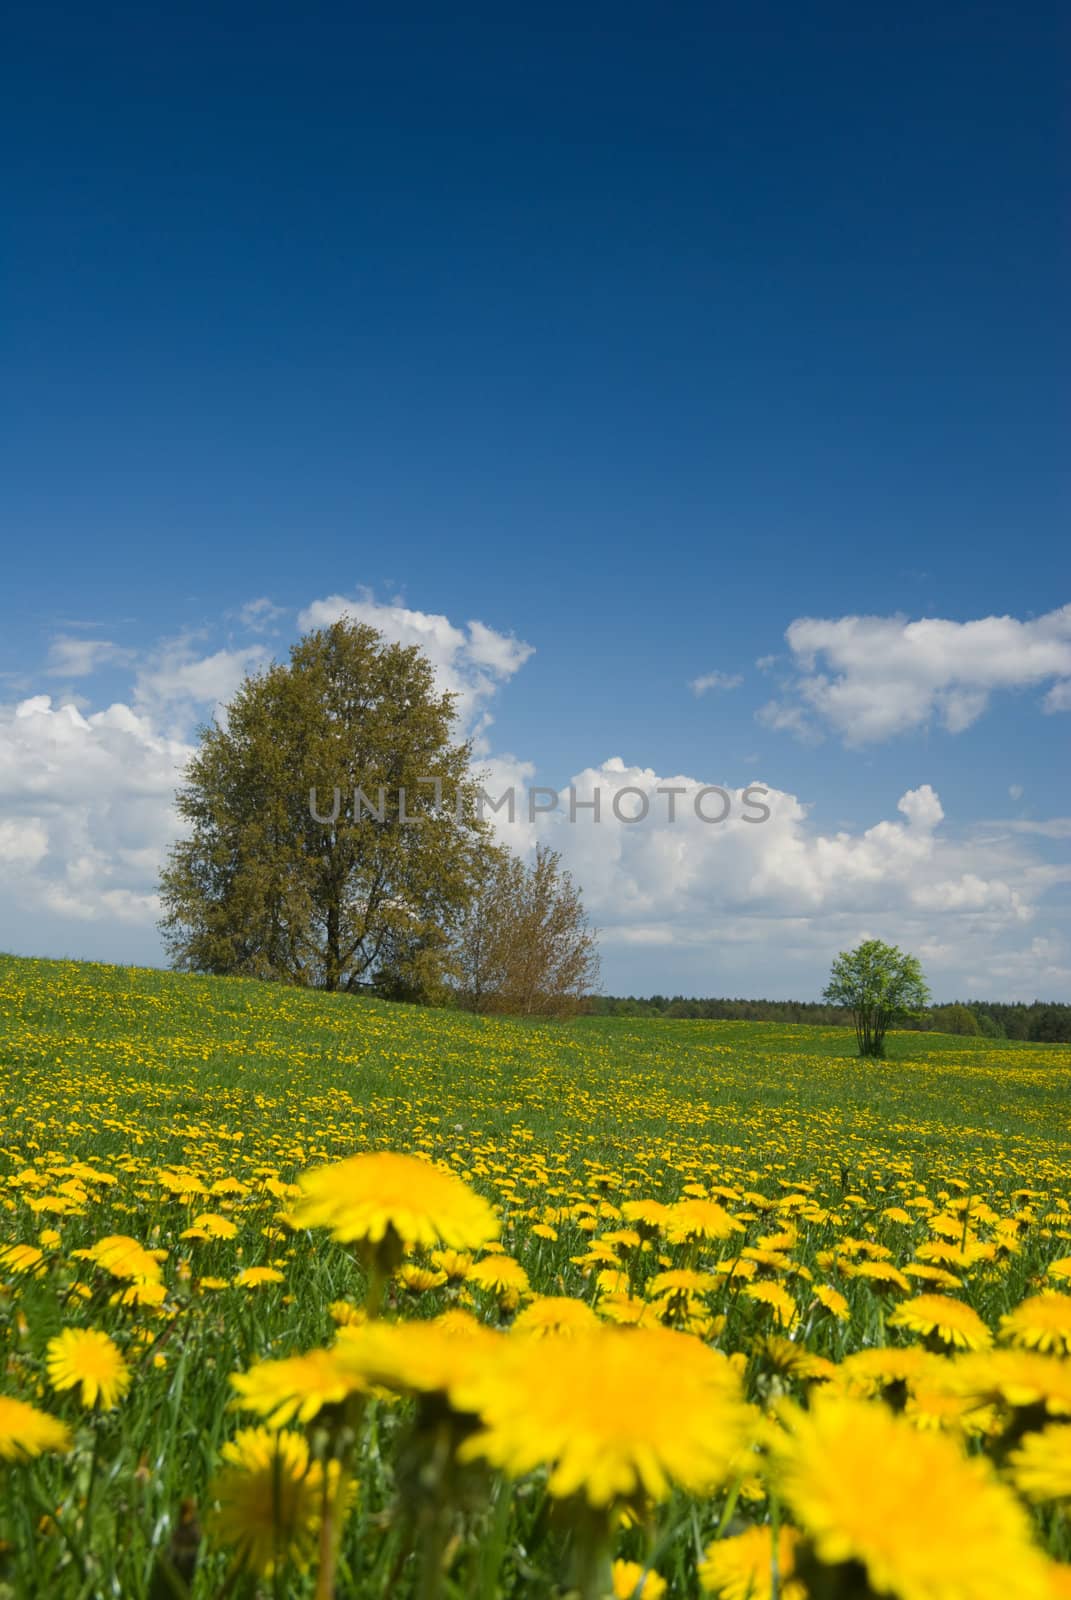 Spring landscape - dandelions fields, trees and sunny weather.